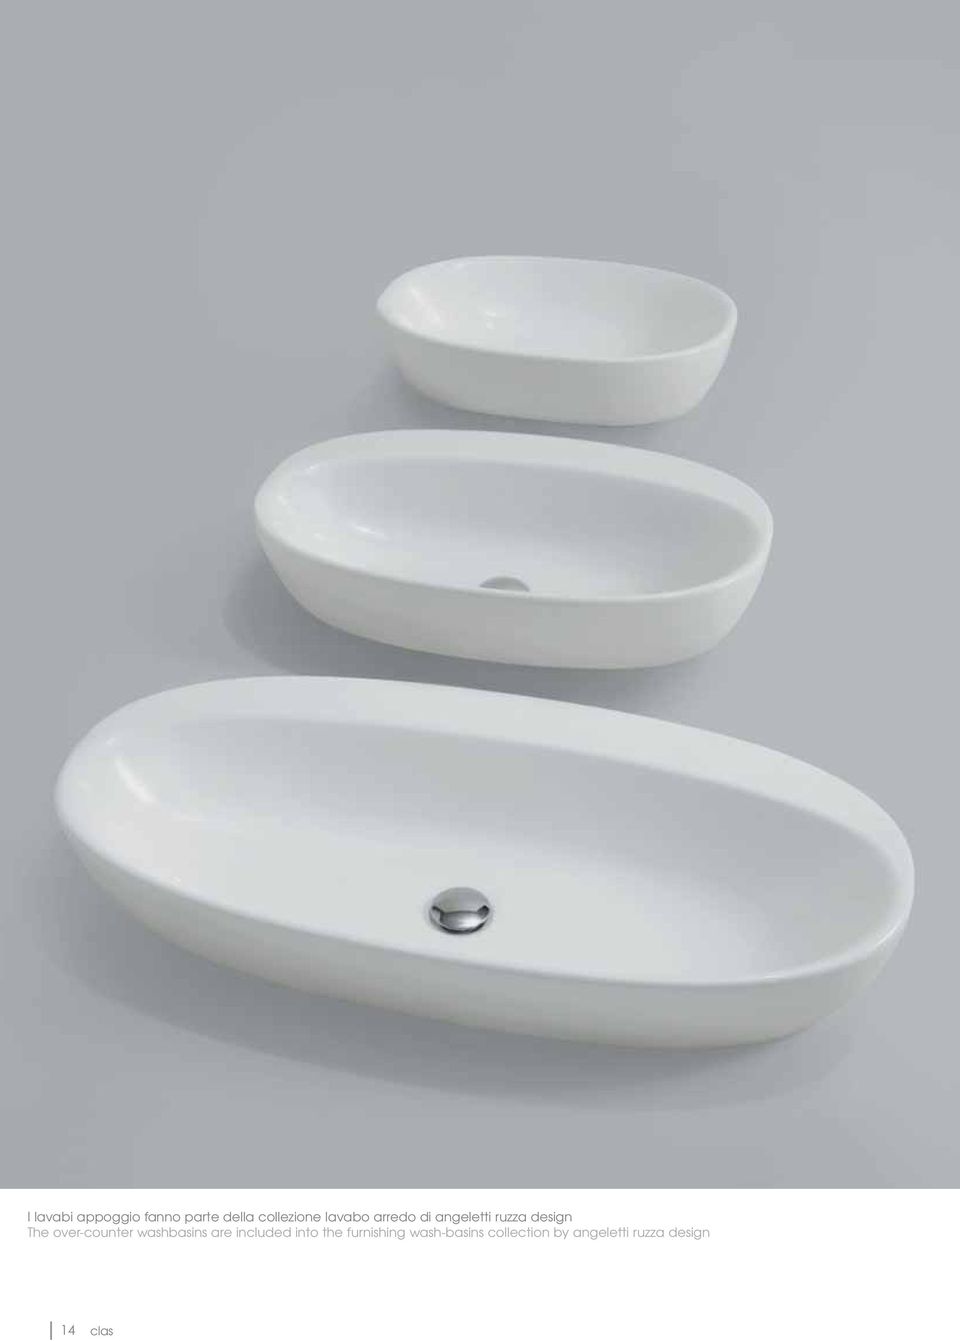 over-counter washbasins are included into the